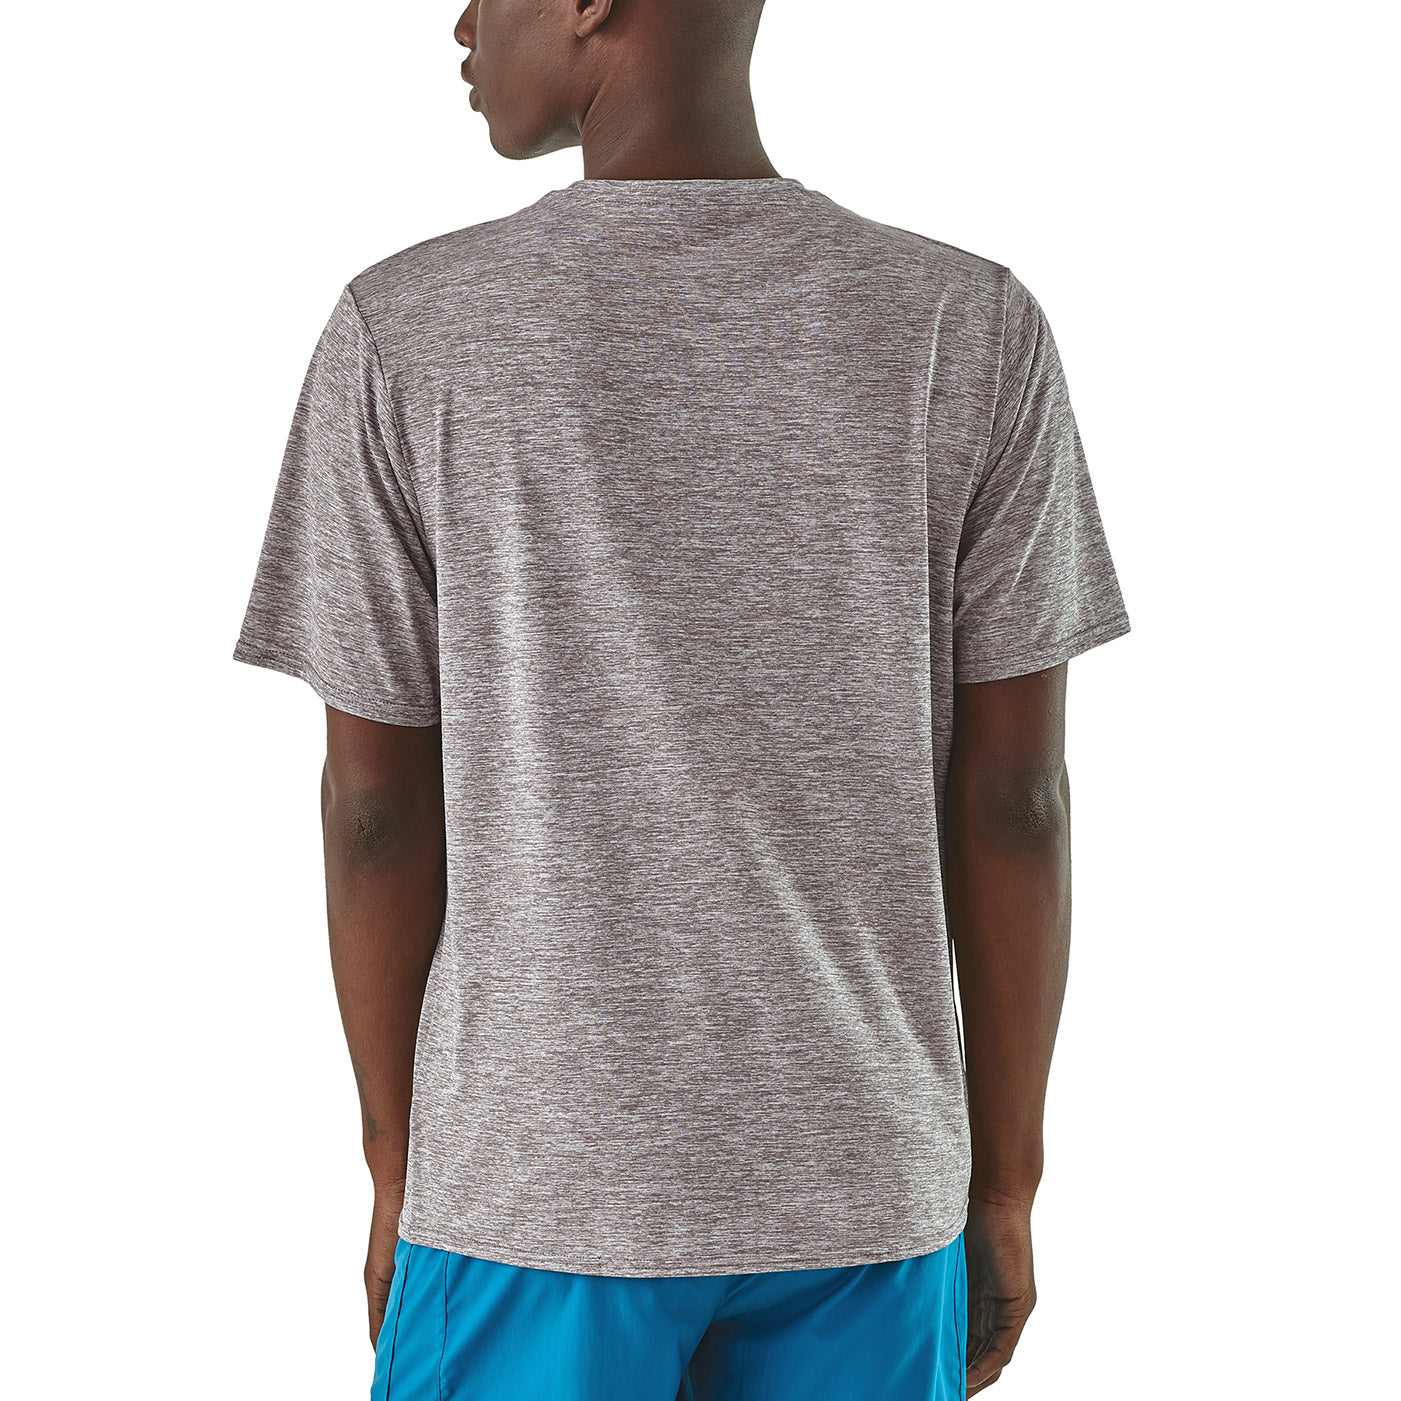 patagonia mens short sleeve capilene cool daily shirt in feather grey on a model, back view